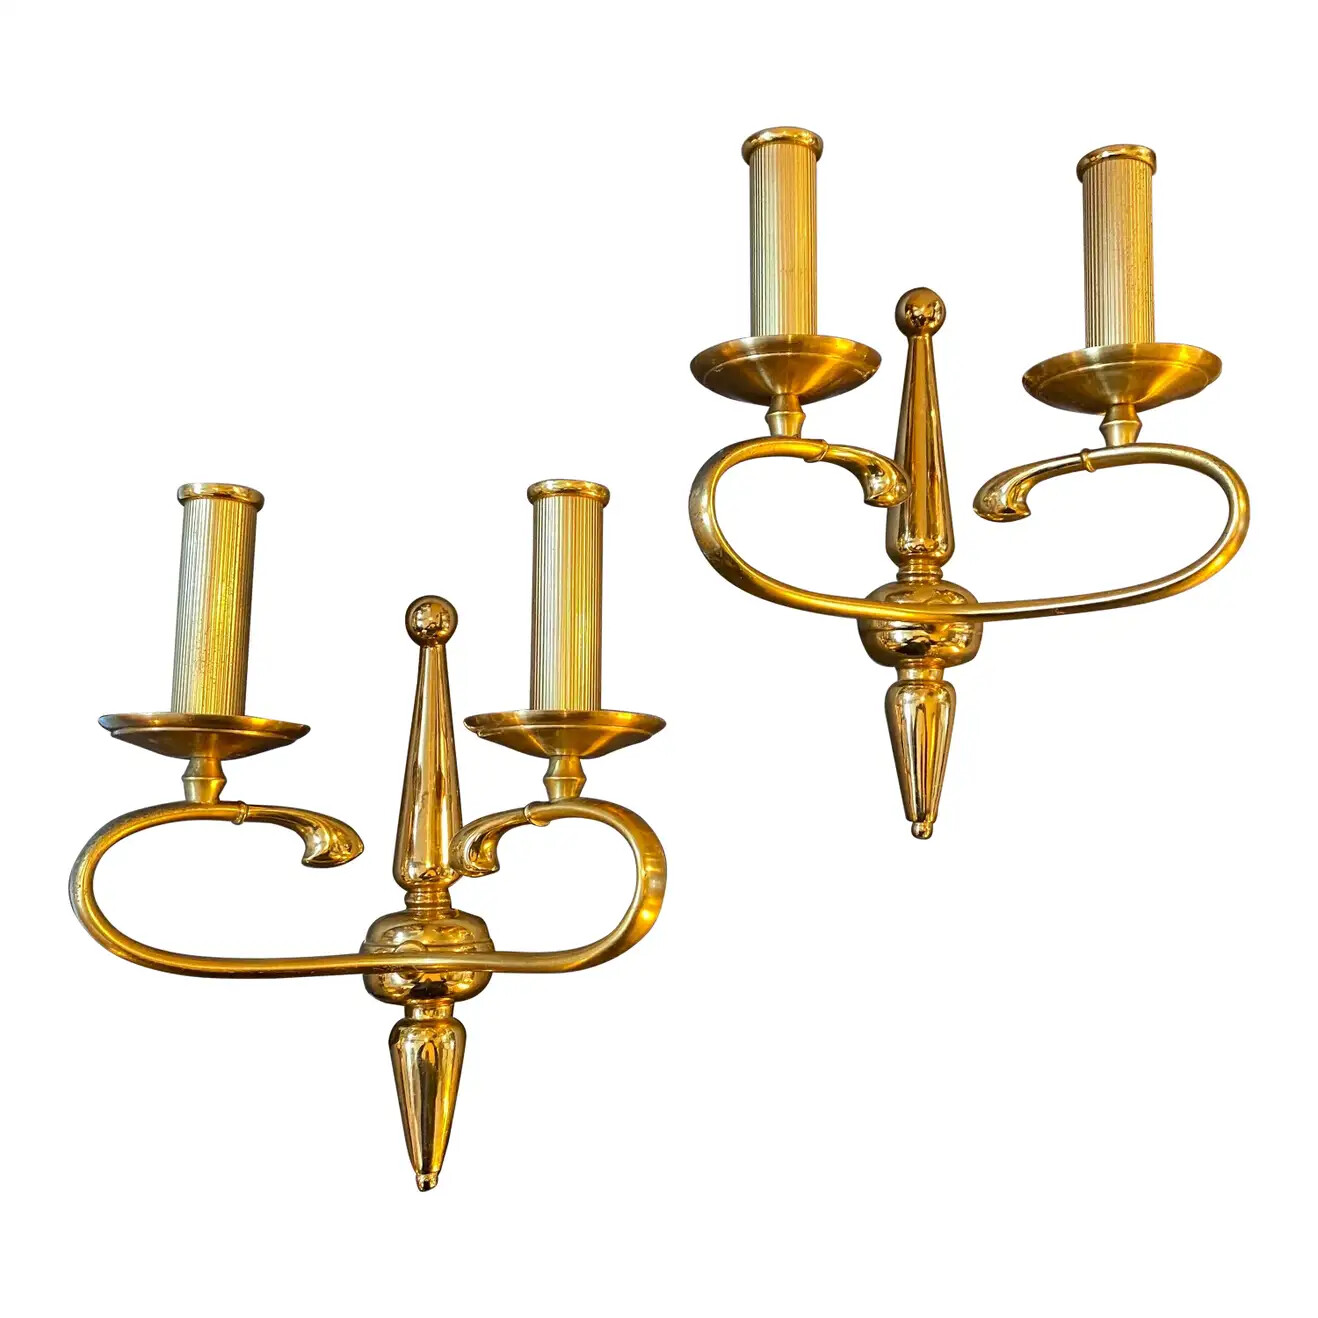 1960s High Quality Set of Solid Brass Wall Sconces by Sciolari Rome